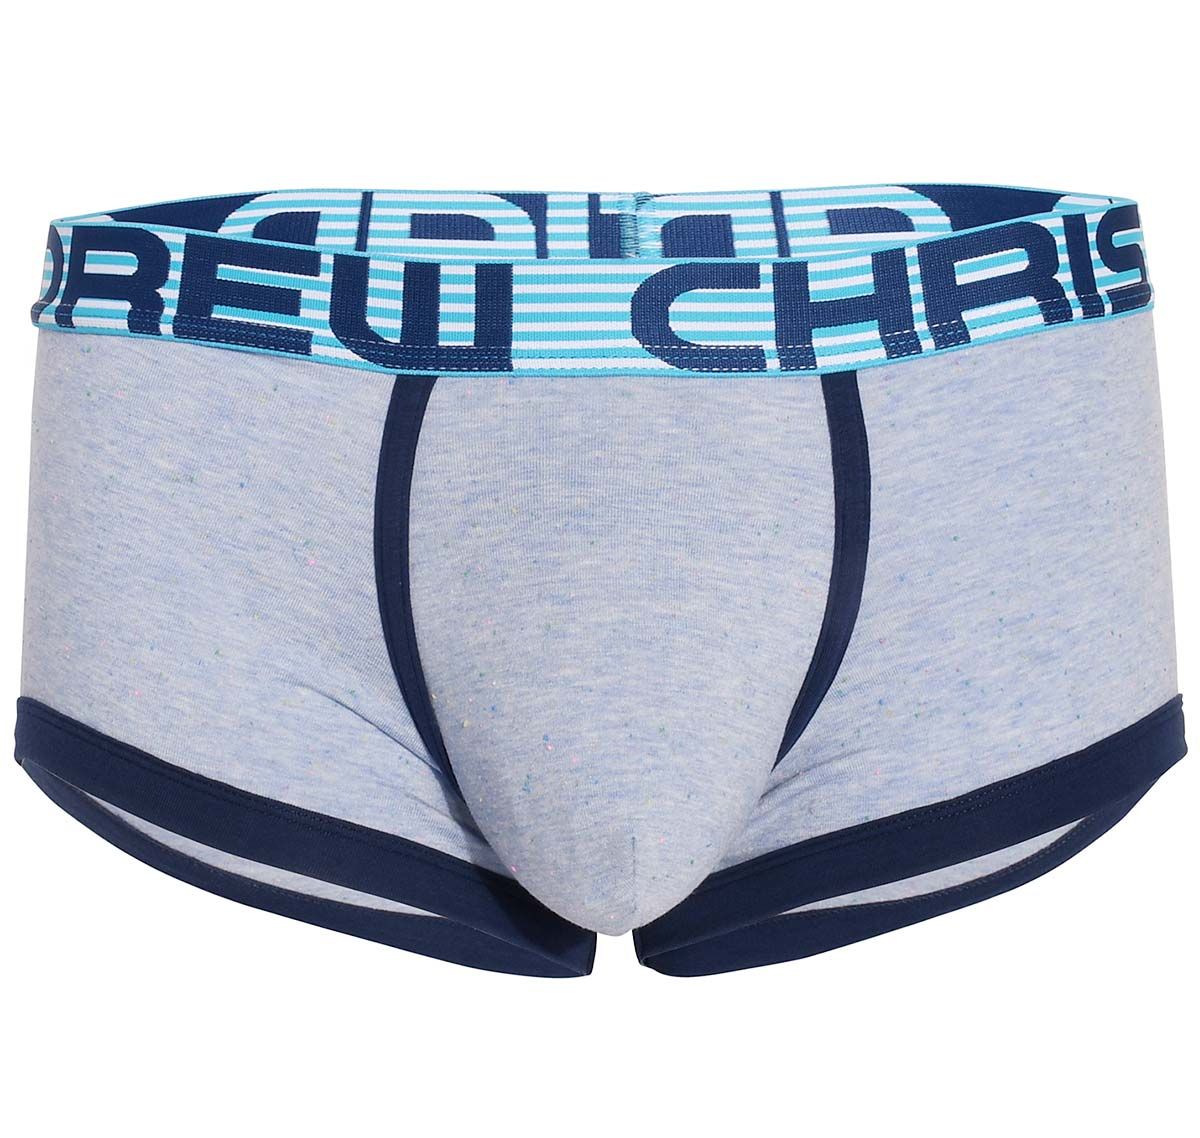 Andrew Christian Bóxer ALMOST NAKED ELEMENT BOXER 92707, azul